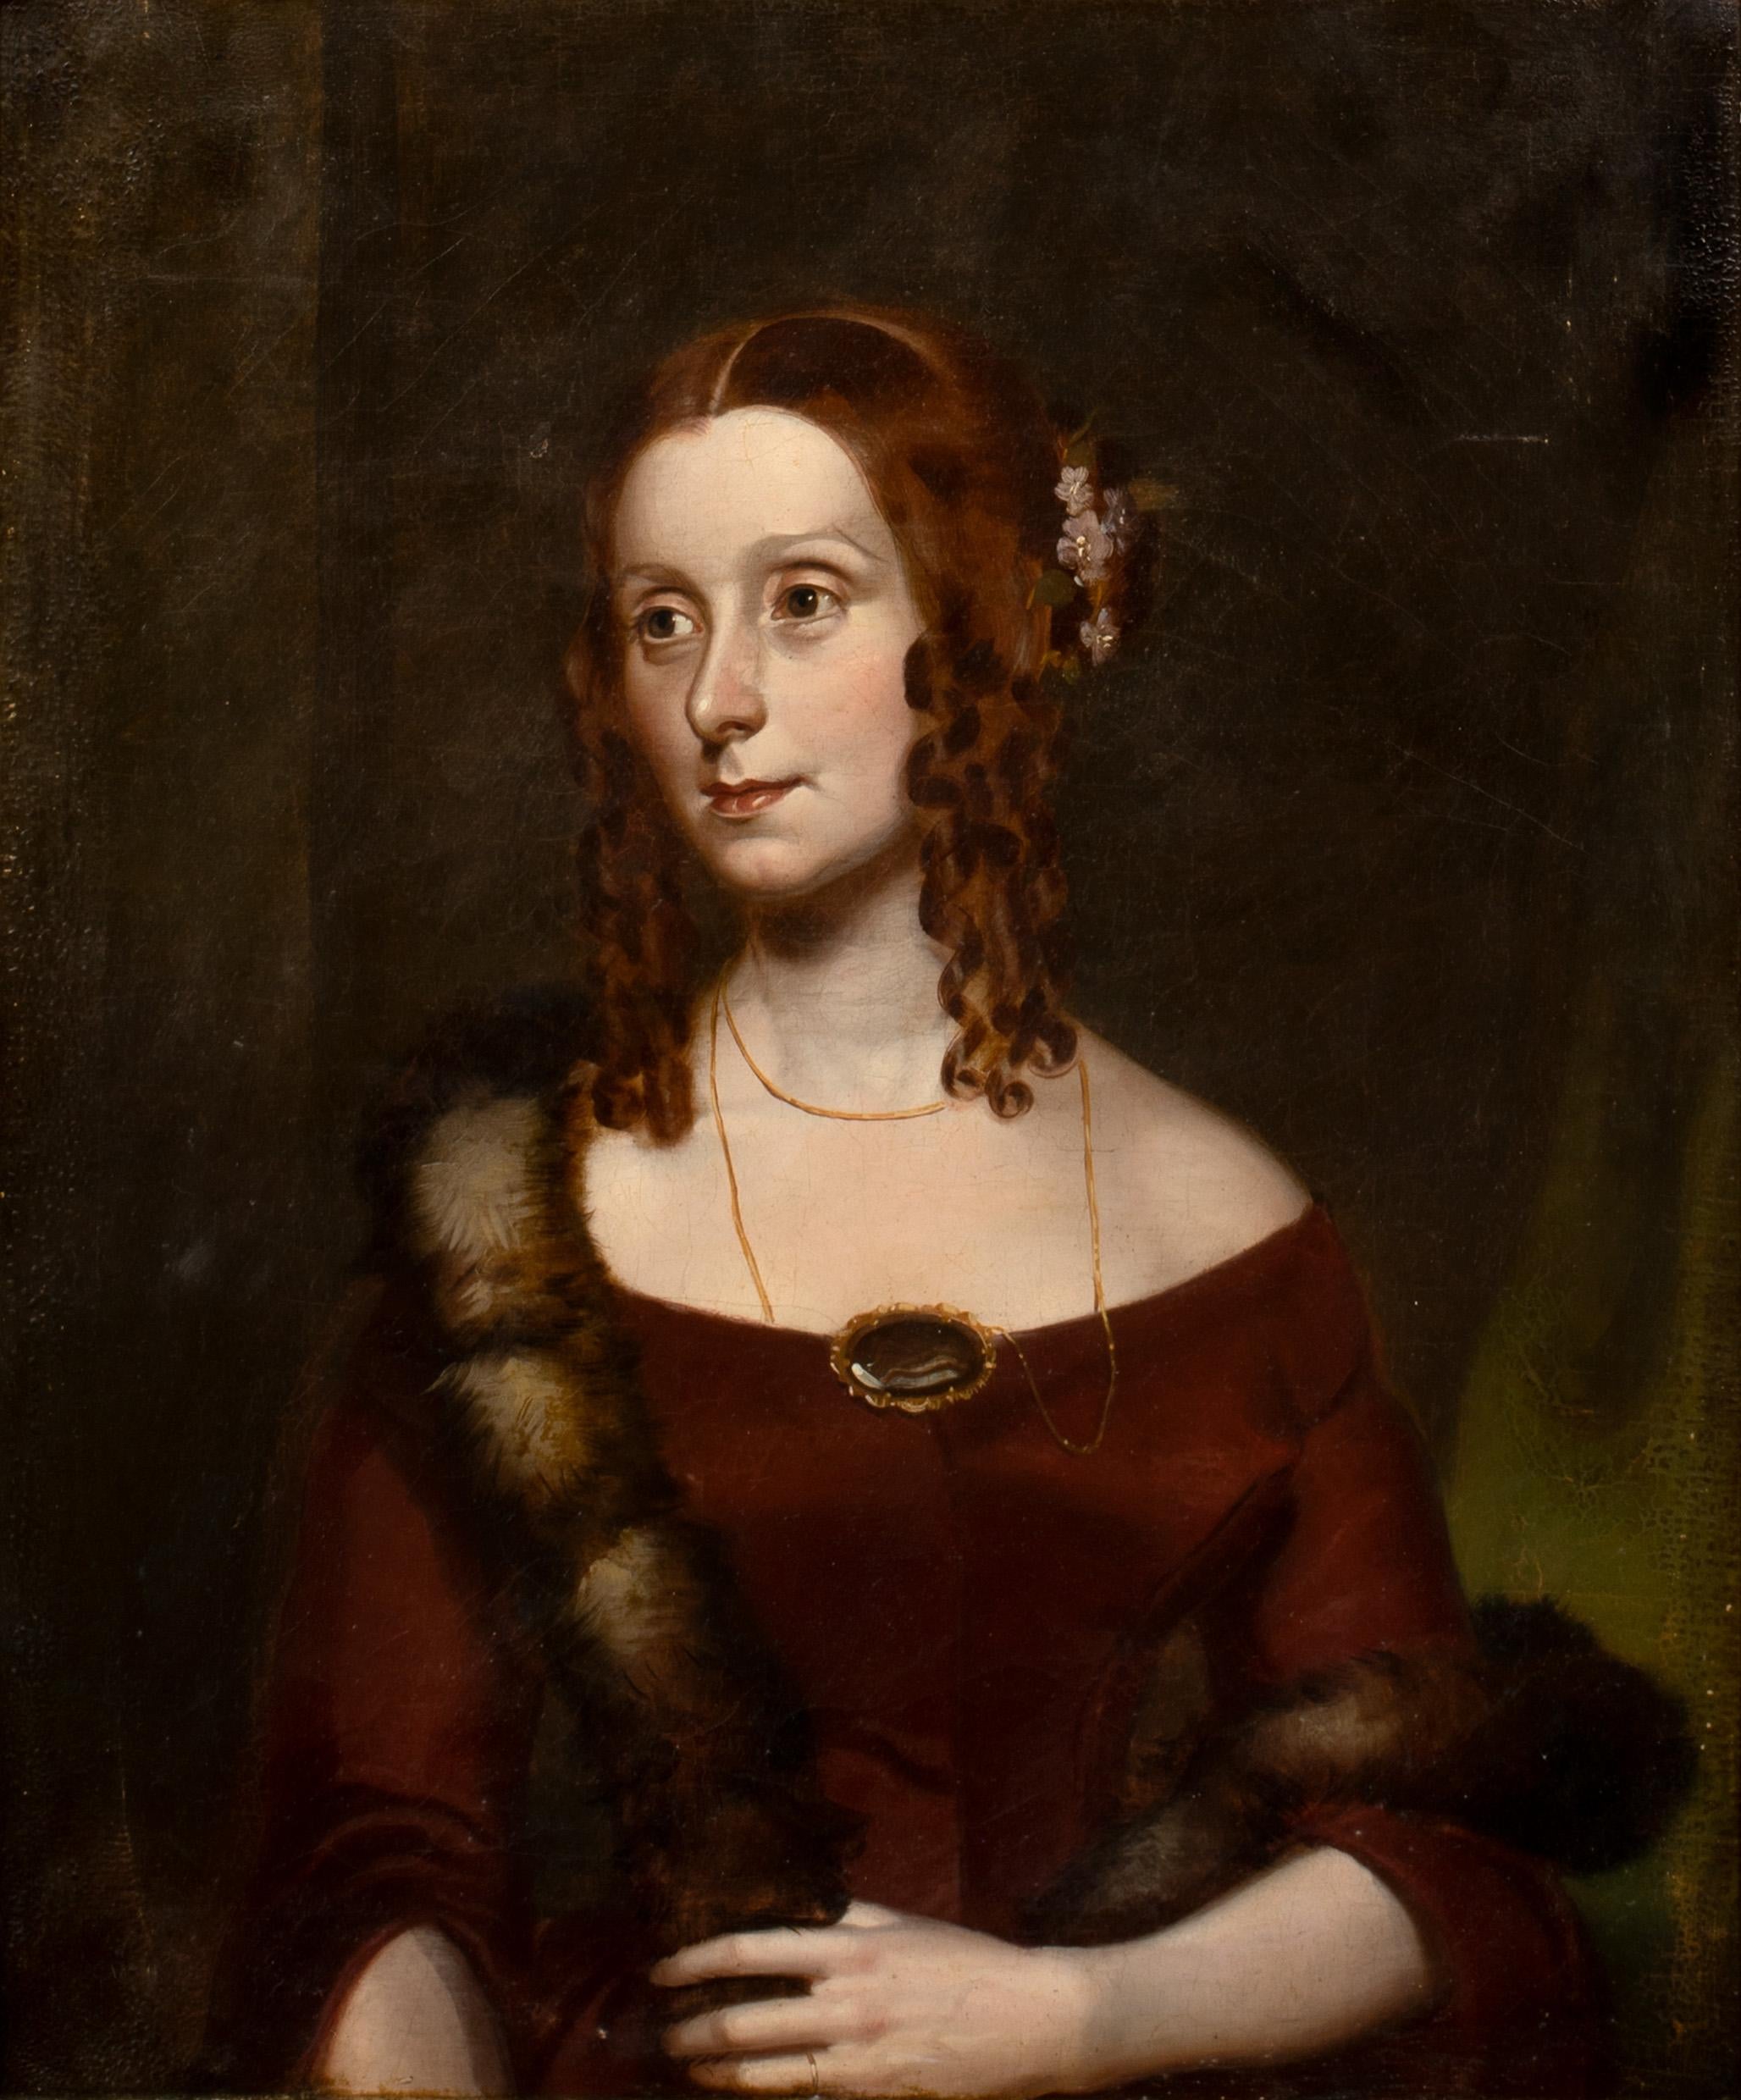 Portrait Of A Red Haired Girl With Ringlets, 19th Century  - Black Portrait Painting by Unknown